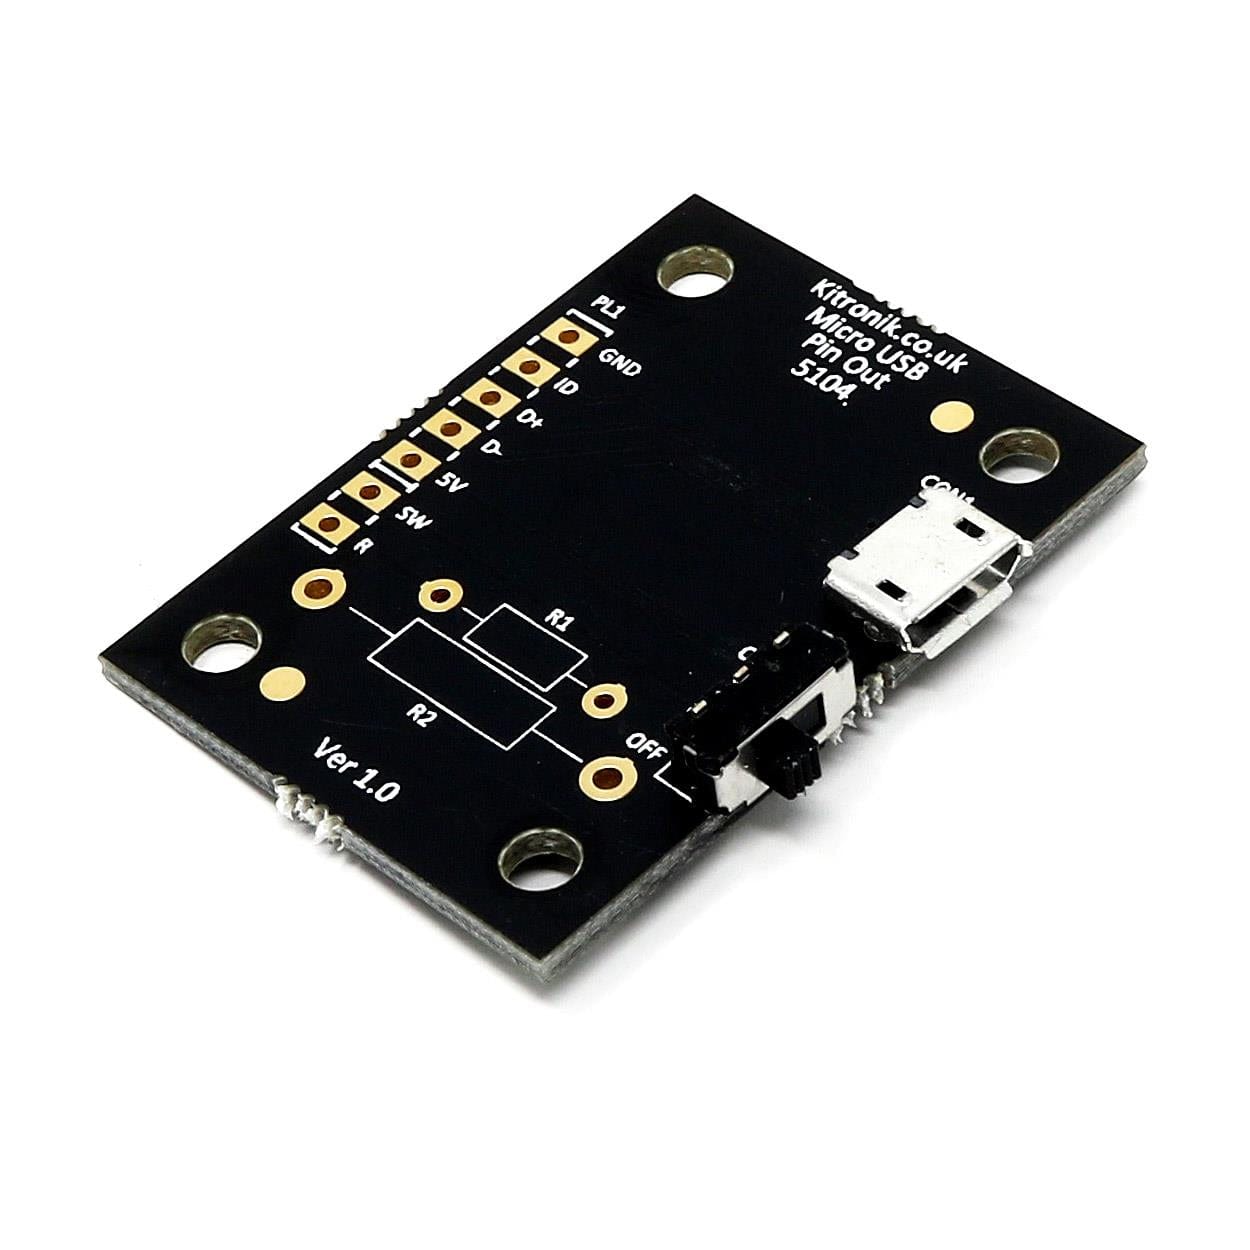 Micro USB Breakout Board with Power Switch - The Pi Hut